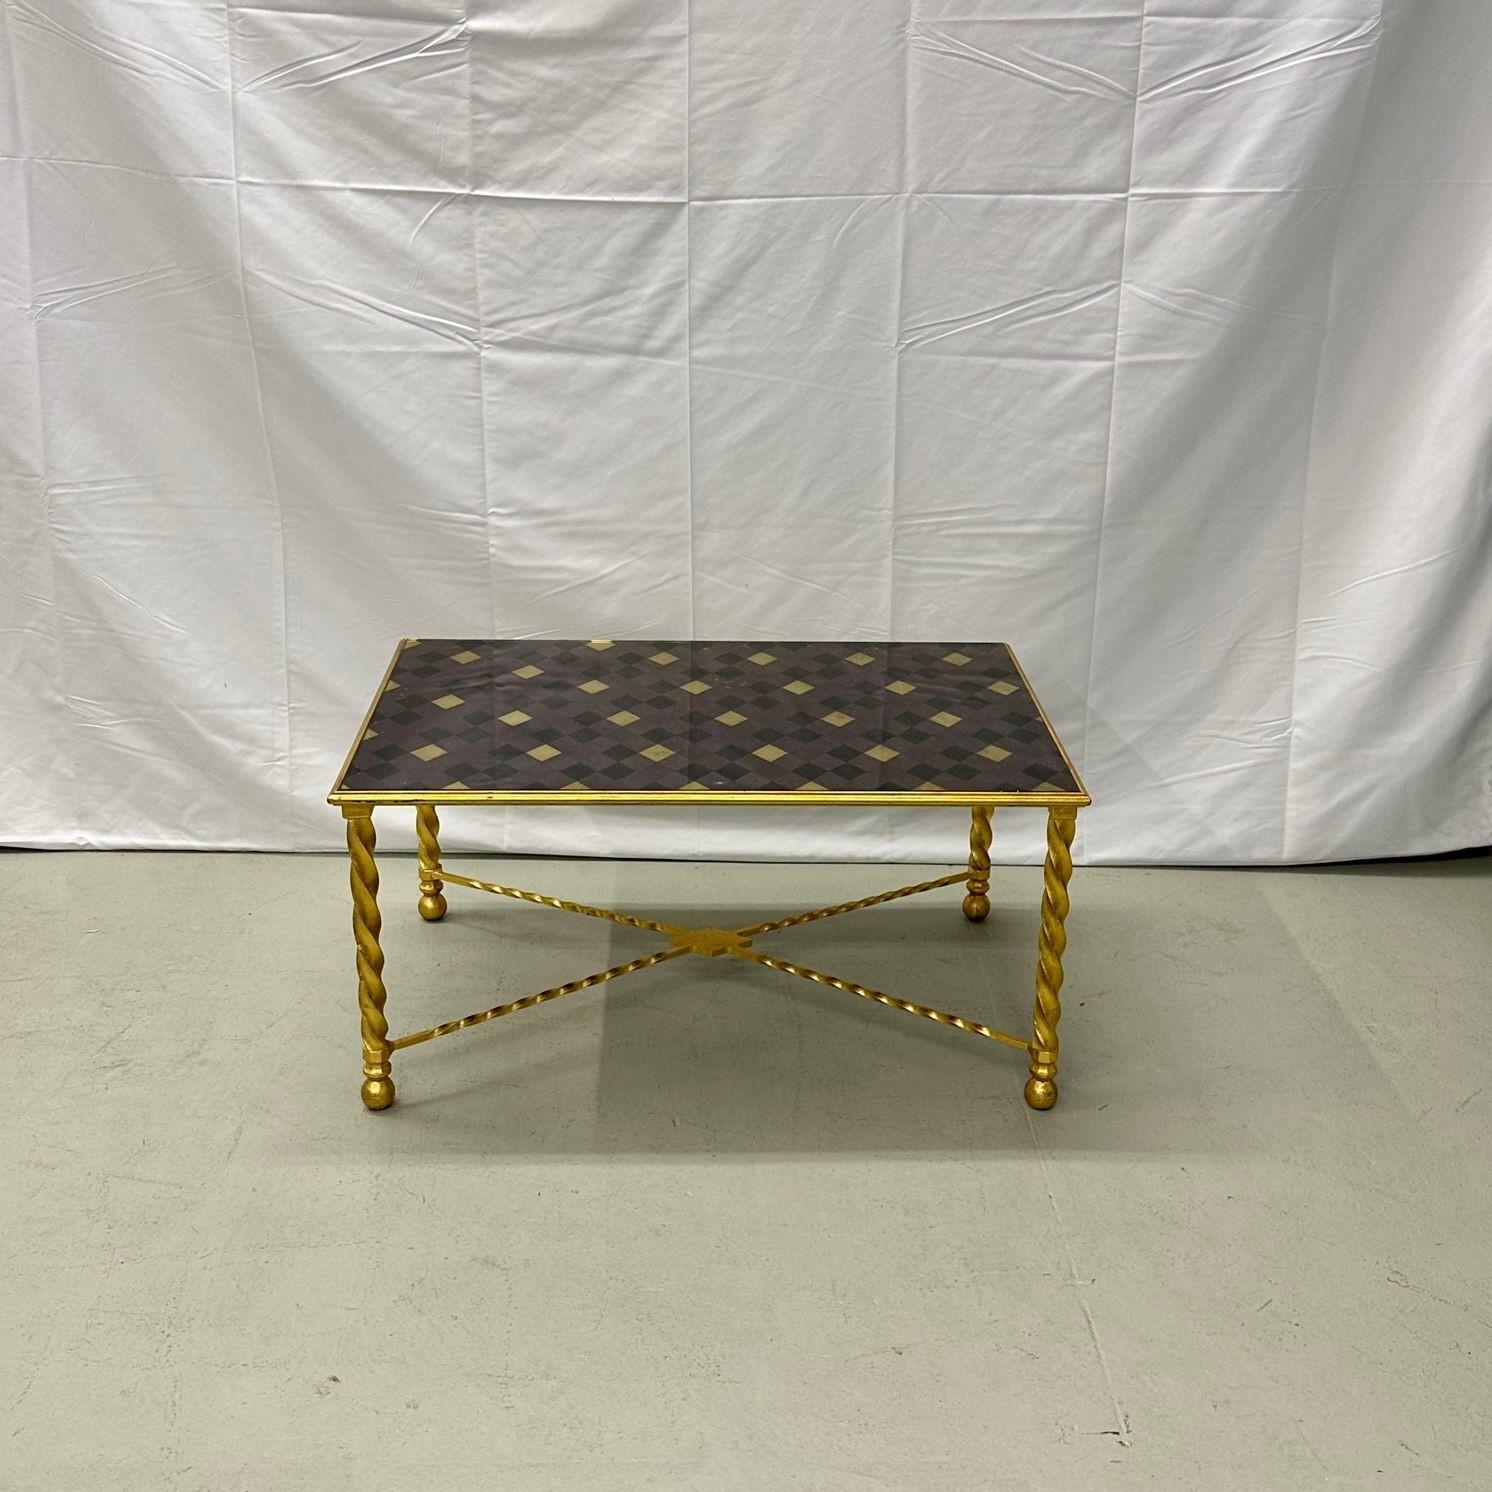 Hollywood Regency Gilt Metal Carved Leg Rectangular Coffee / Cocktail Table In Good Condition For Sale In Stamford, CT